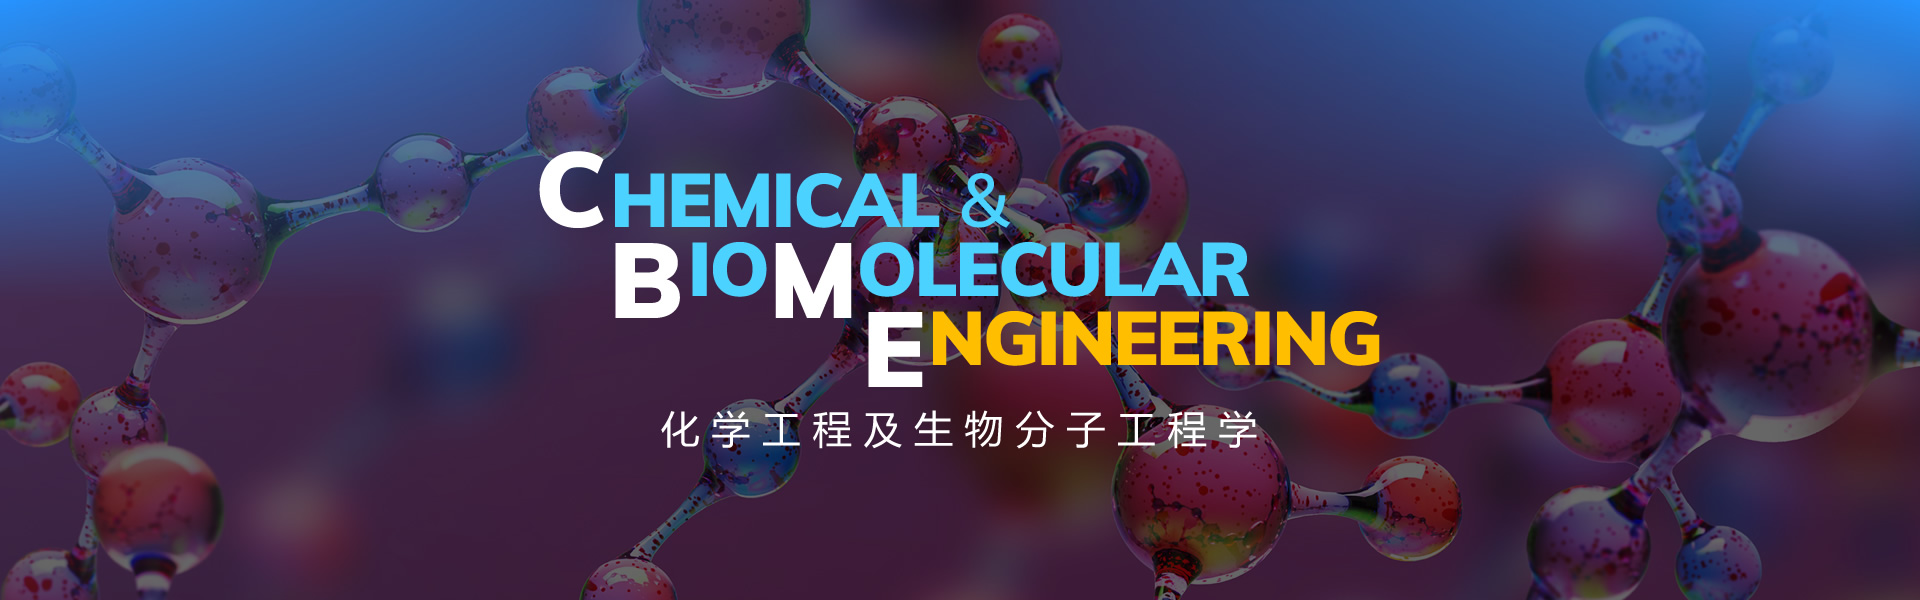 Chemical and Biomolecular Engineering